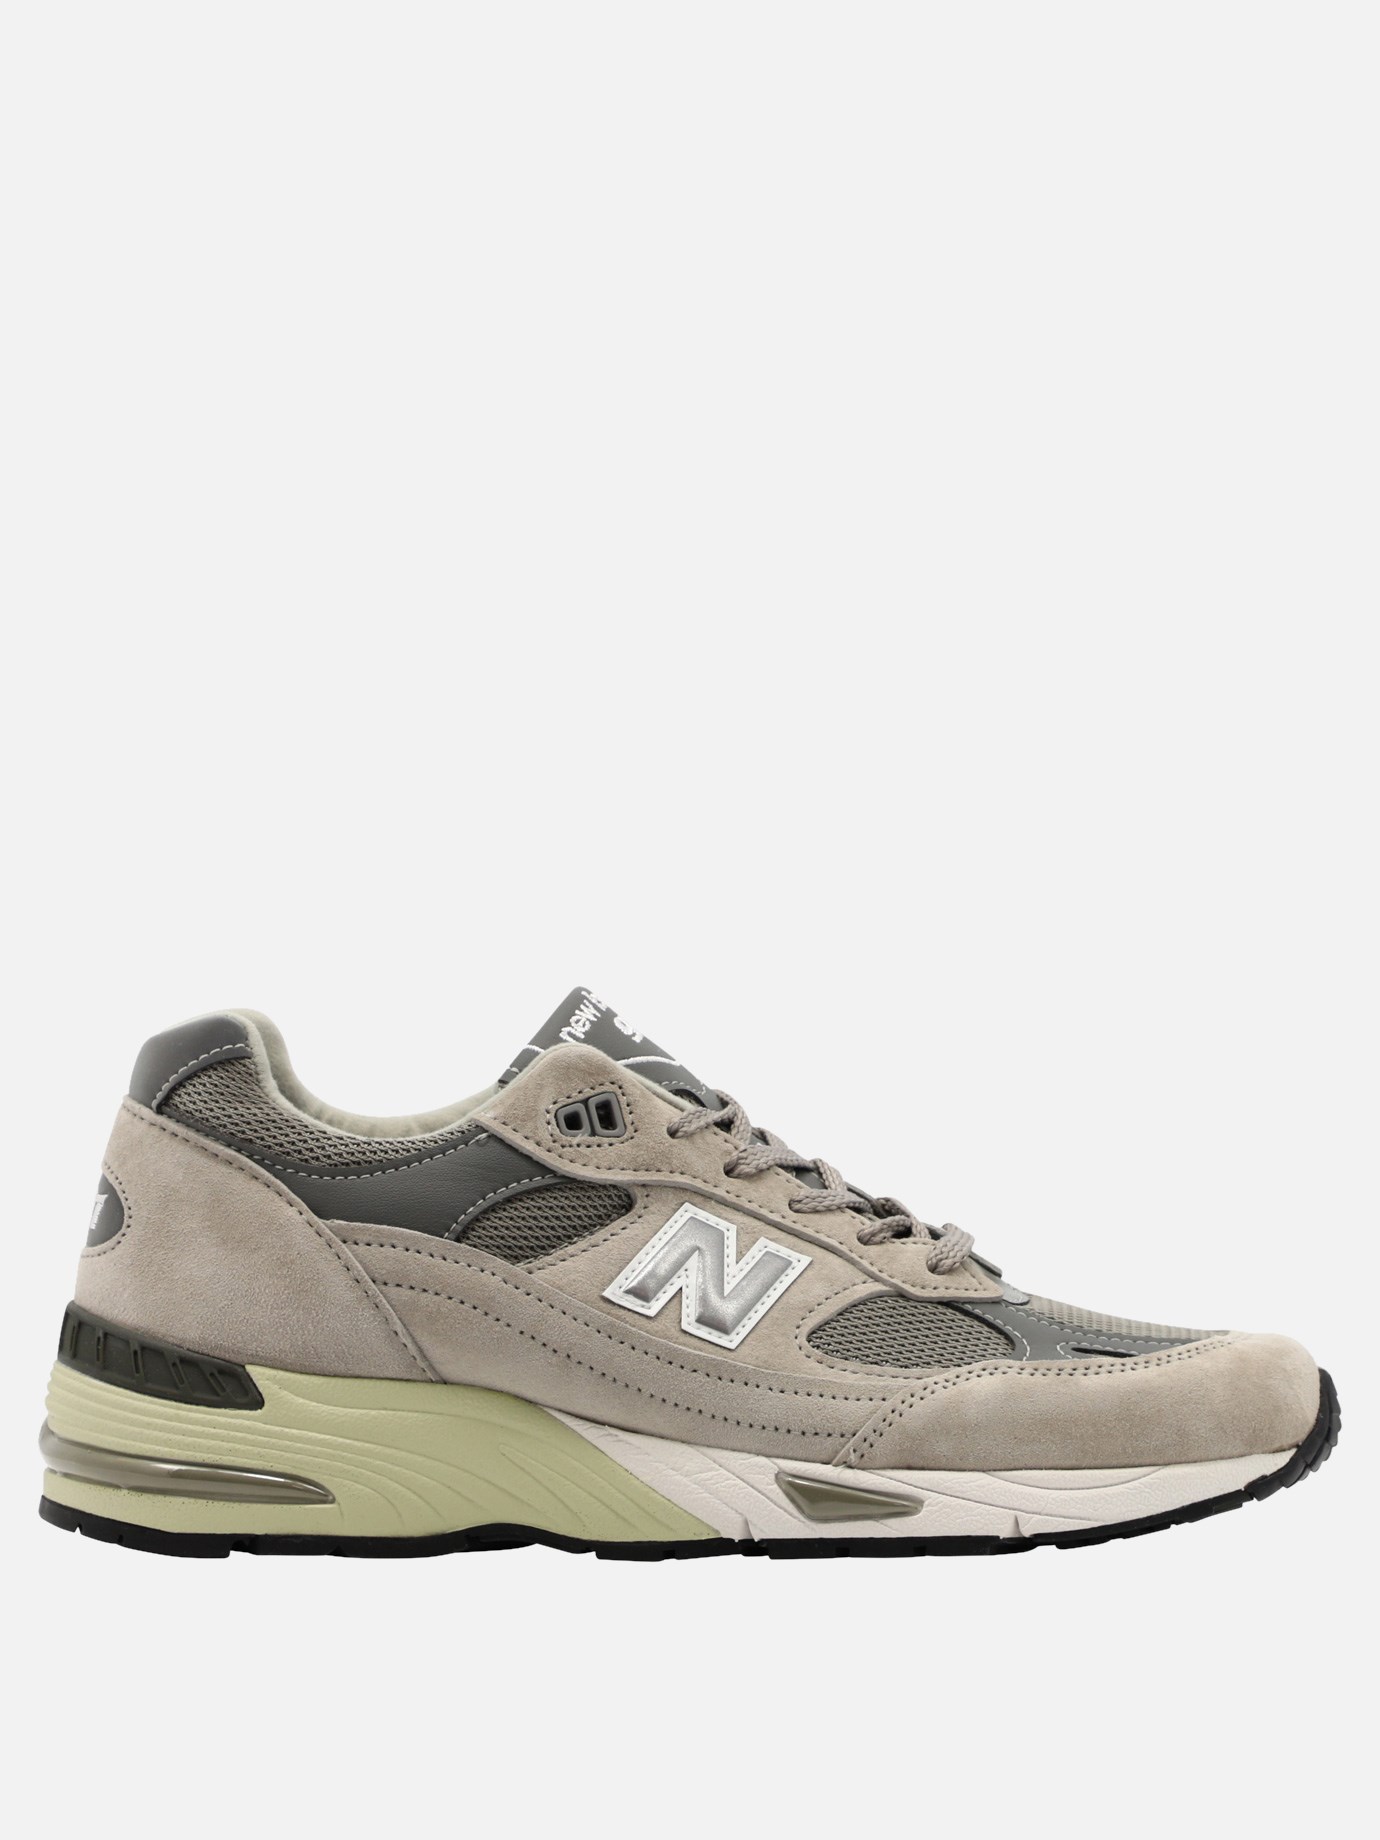 Sneaker  991  by New Balance